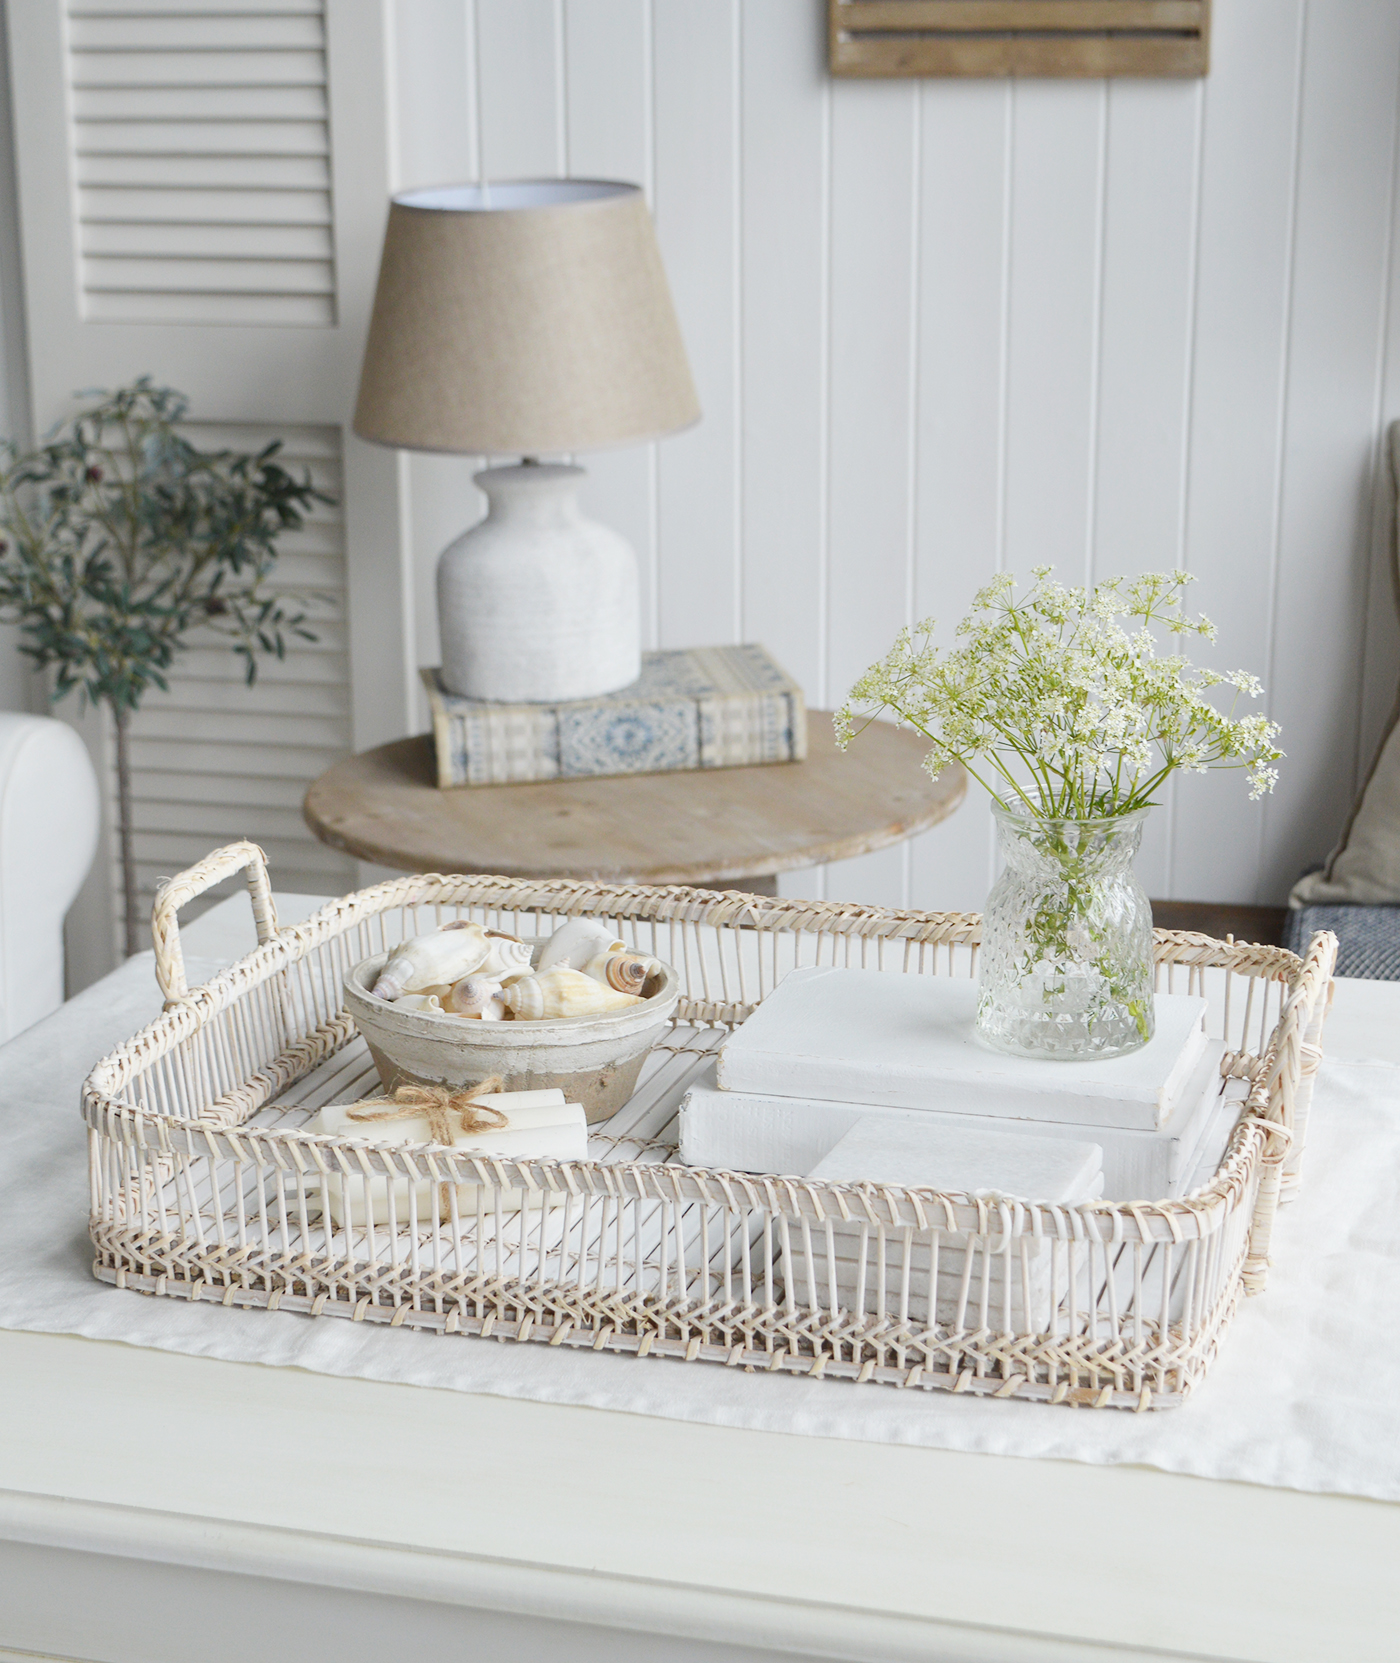 White Furniture and accessories for the home. Putnam white washed Wooden Tray for Coffee Table Styling and decorating shleves and console tables for New England, Country and coastal home interior decor